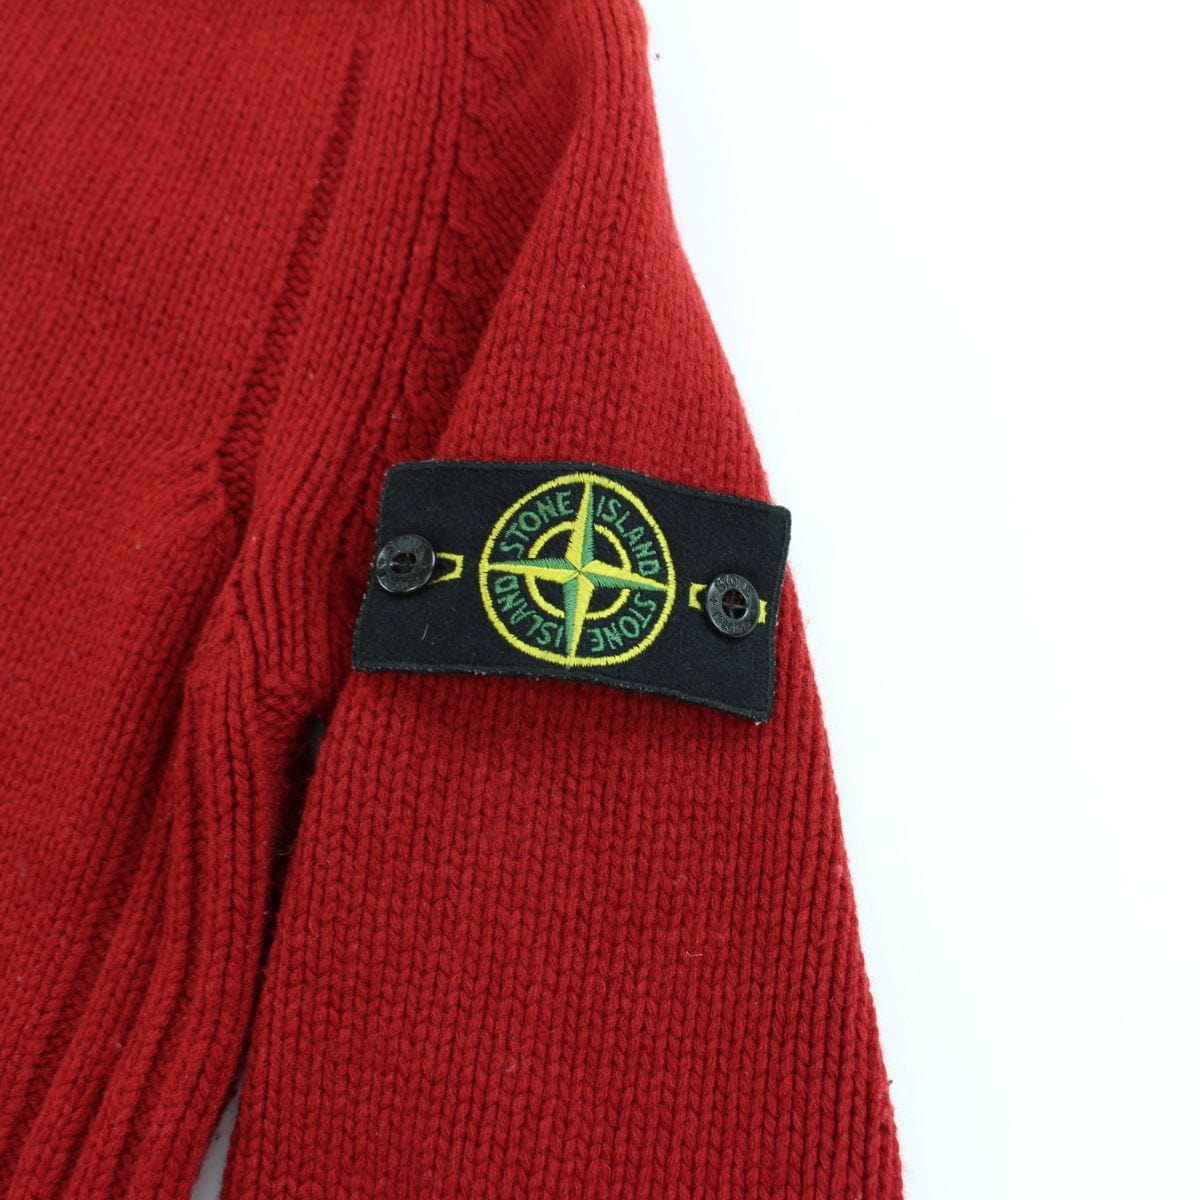 Stone Island AW 2004 Quarter Zip Knitted Jumper Red - SaruGeneral